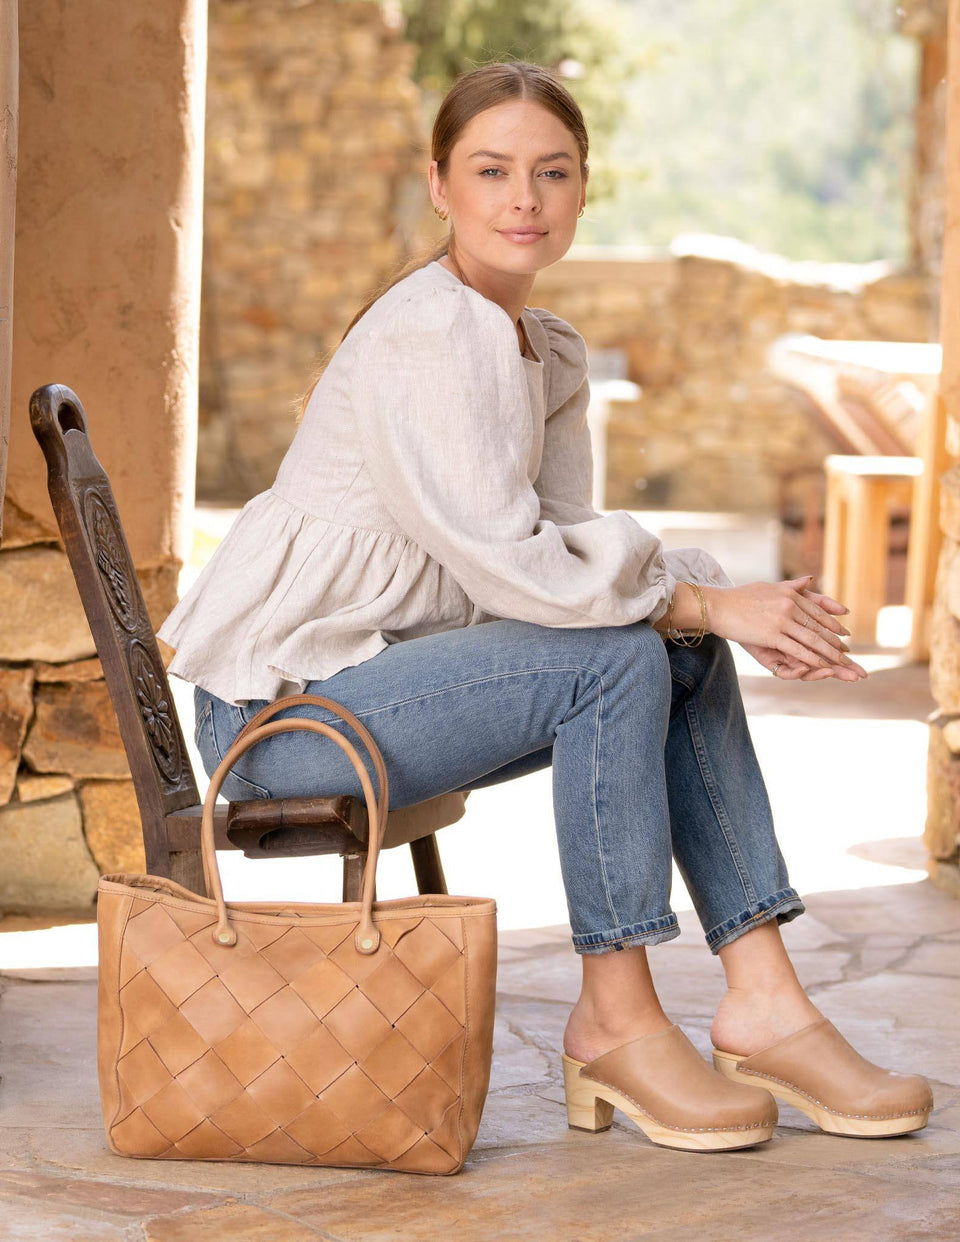 Carry-All Handwoven Tote Almond